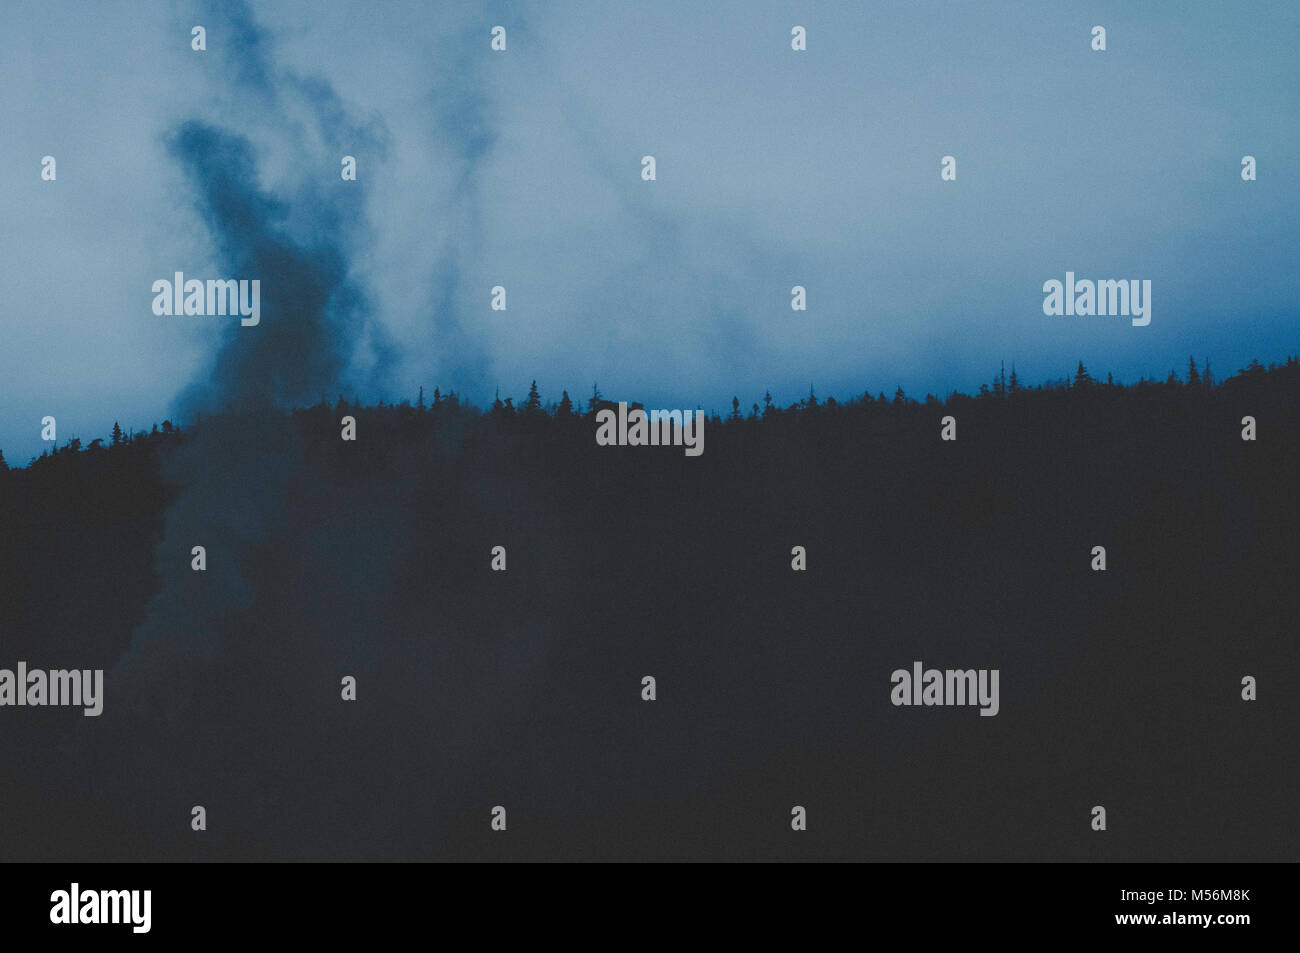 Mystical night scene with smoke and forest line. Stock Photo